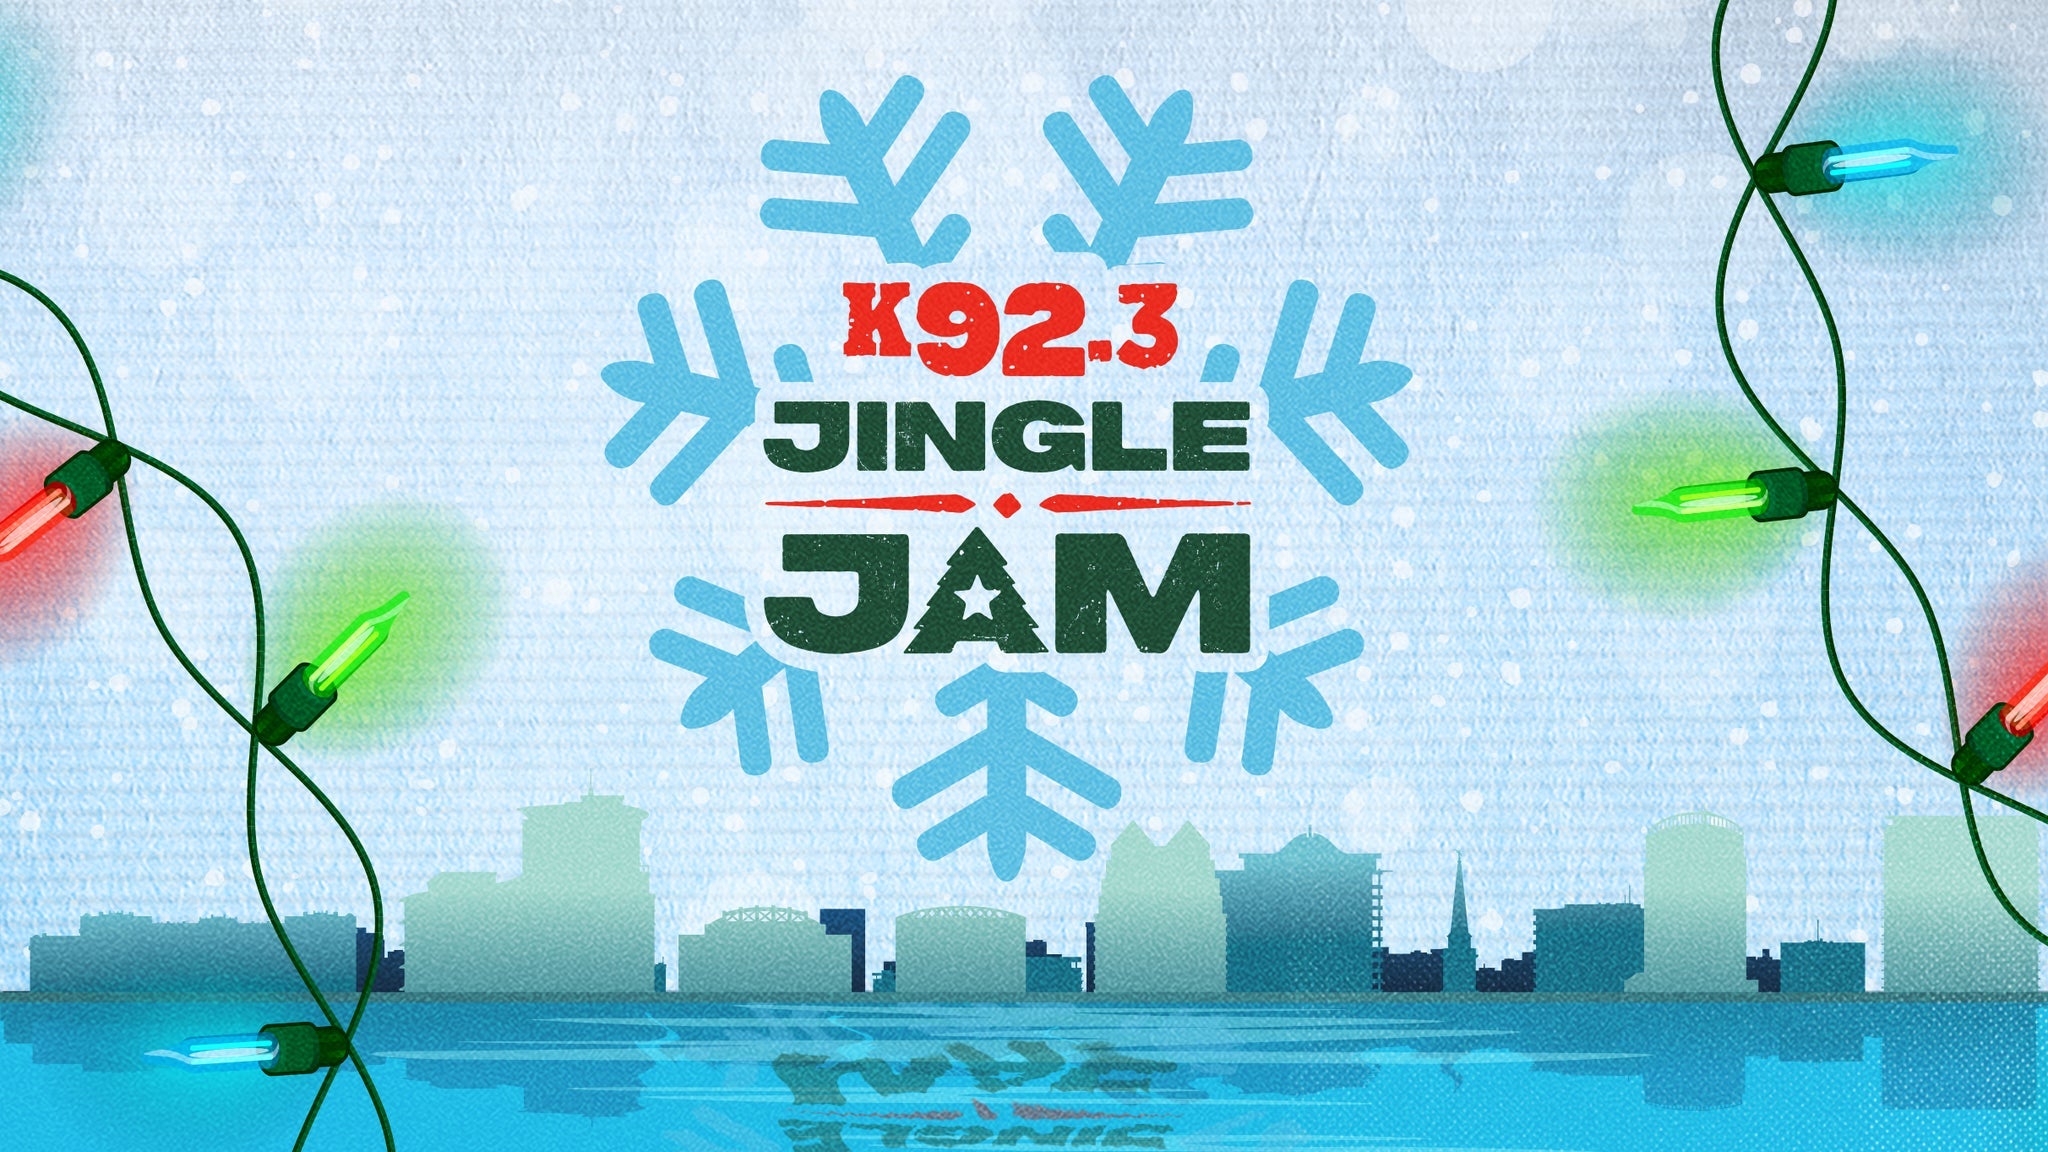 K92.3 Jingle Jam Featuring Walker Hayes tickets, presale info and more